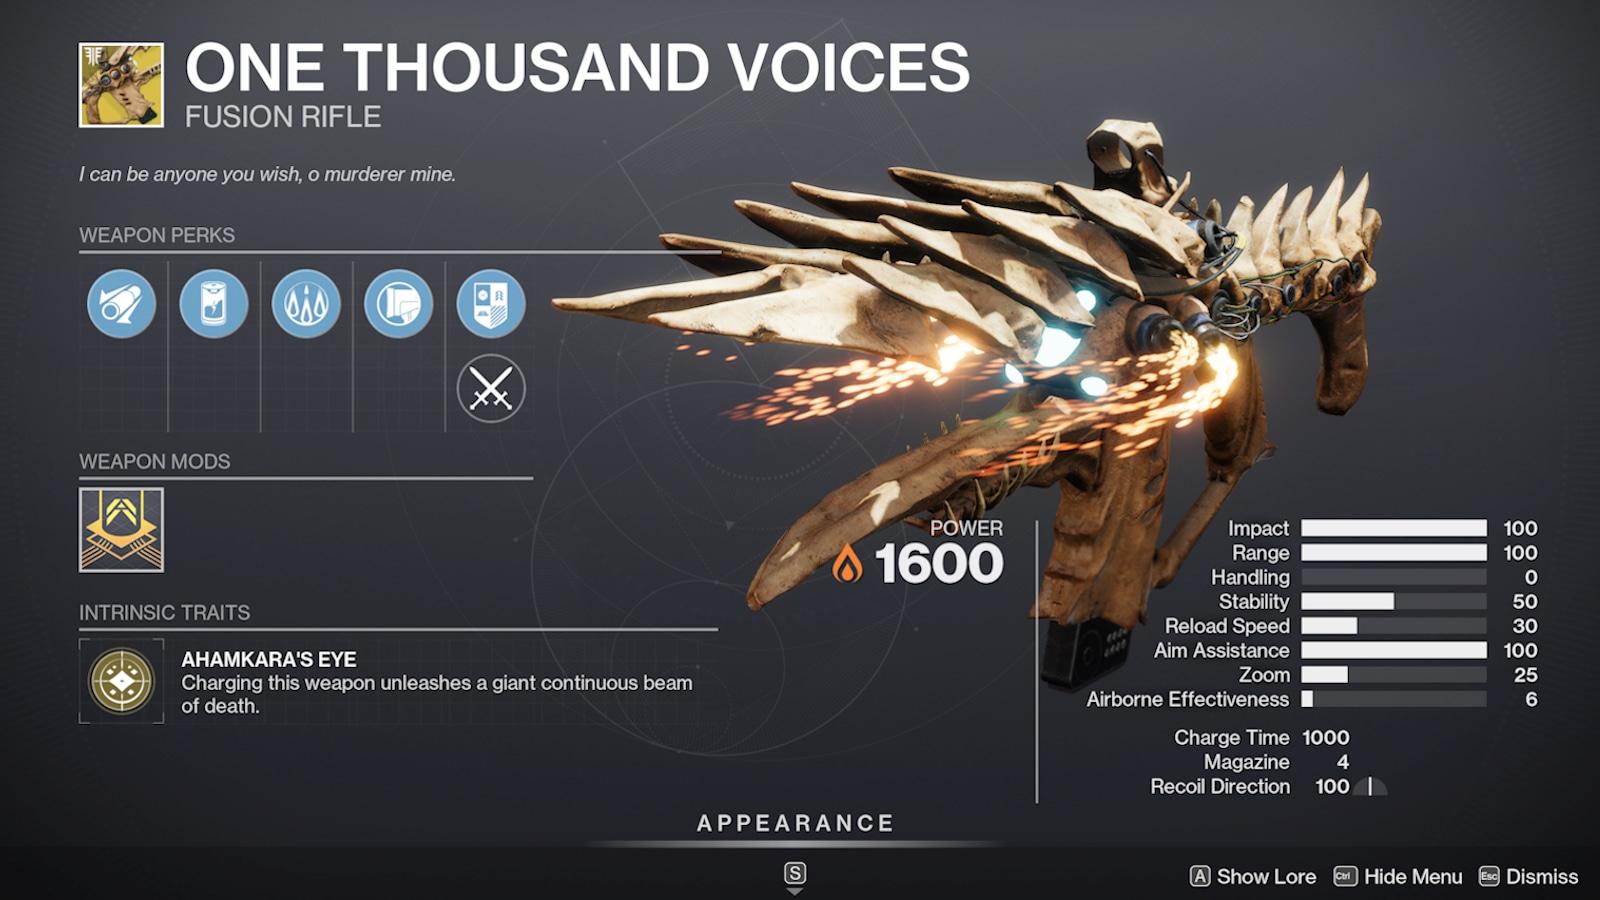 The One Thousand Voices Exotic Fusion Rifle Heavy Weapon from Destiny 2.